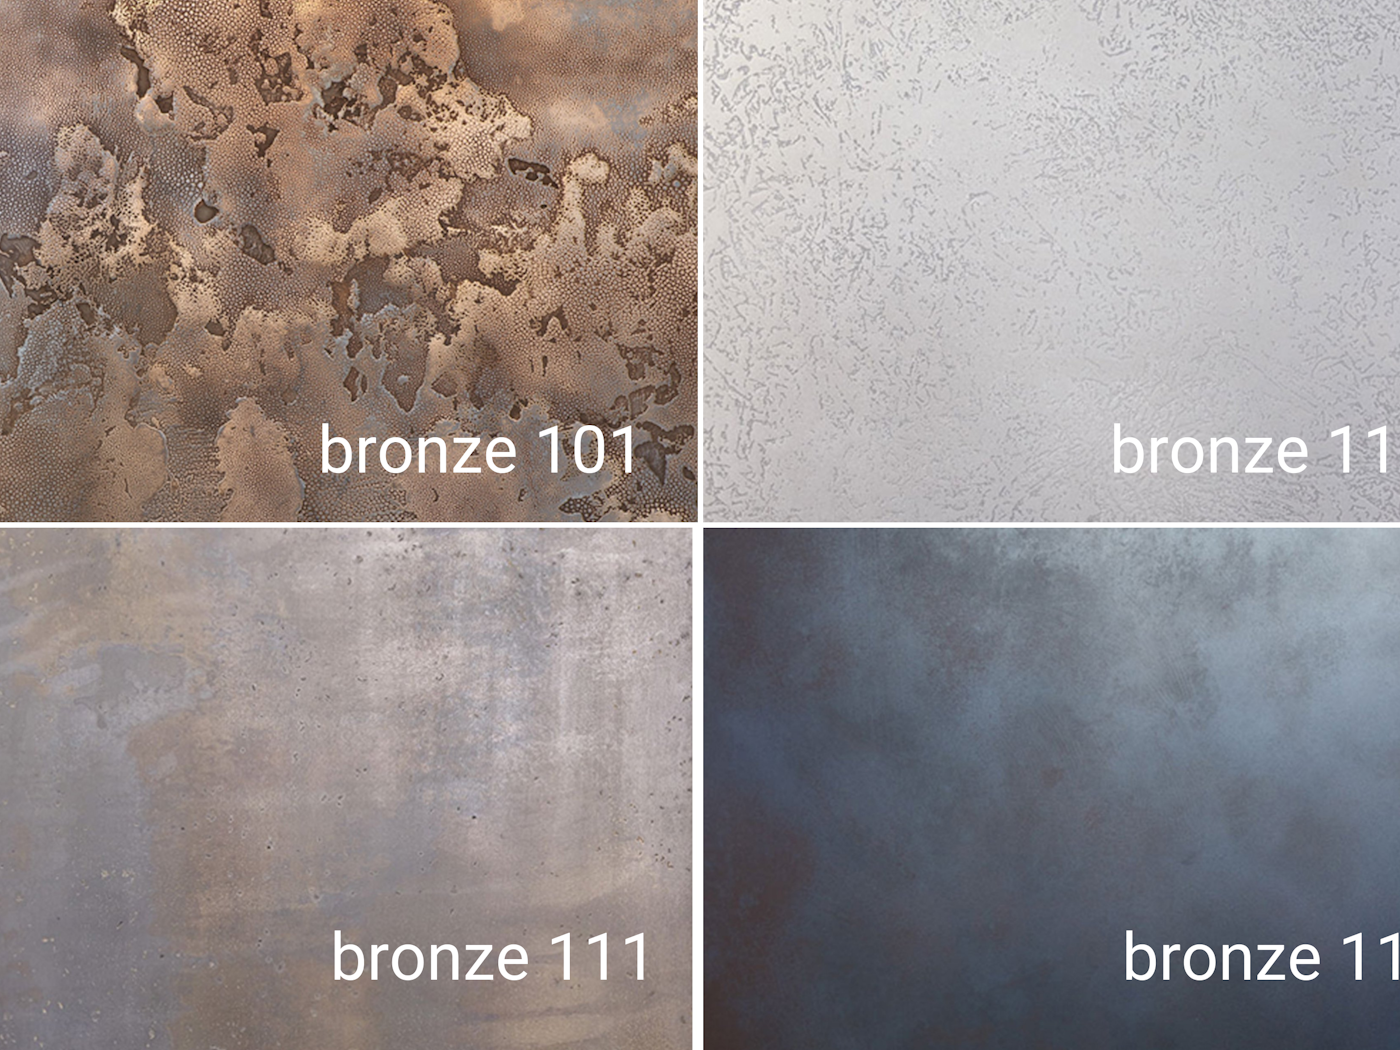 ...and luxurious metallic bronze finishes come in at the higher end